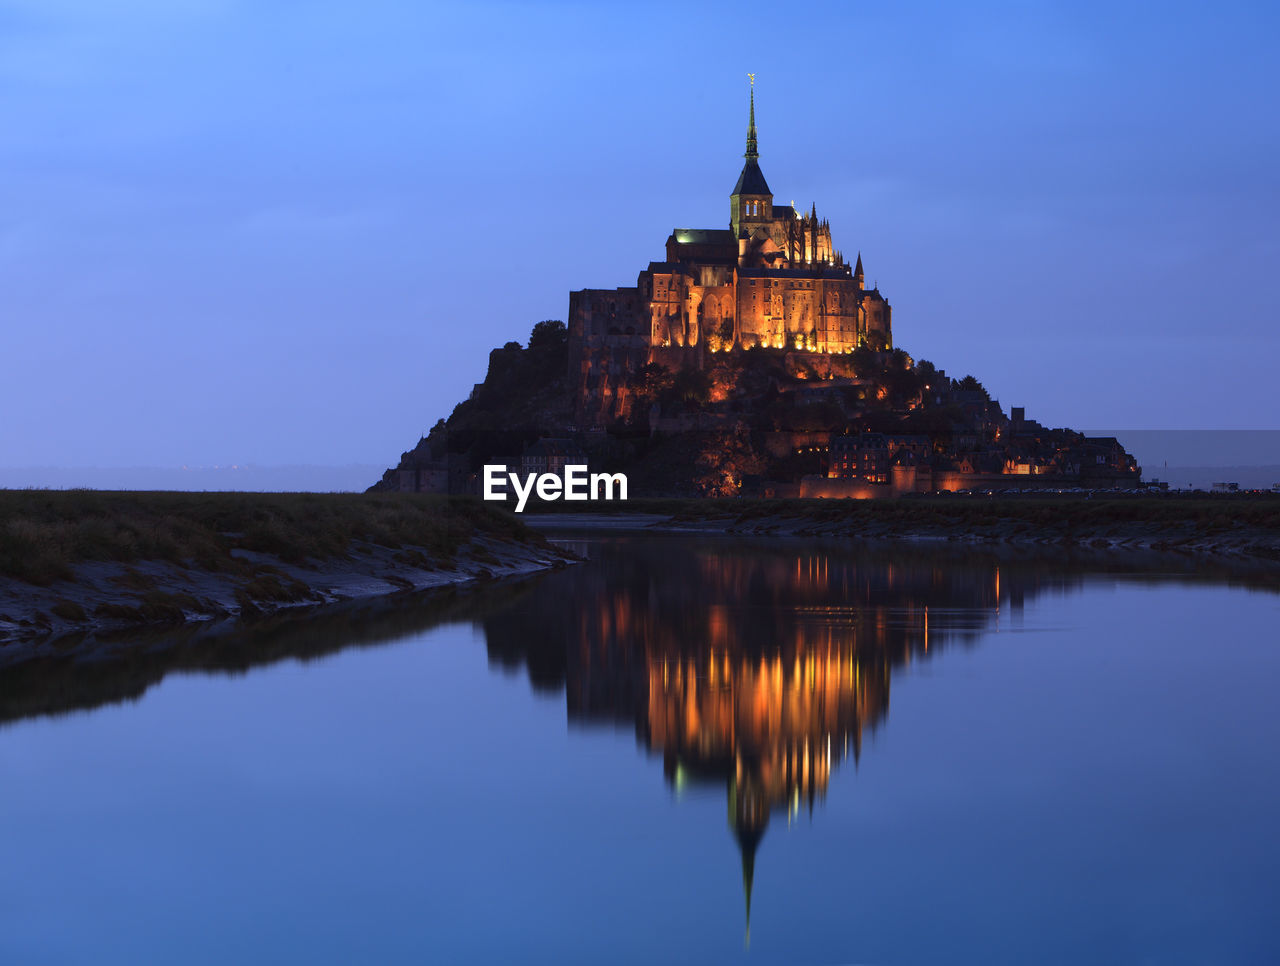 Night view of the famous mont saint michel abbey in normandy, france.